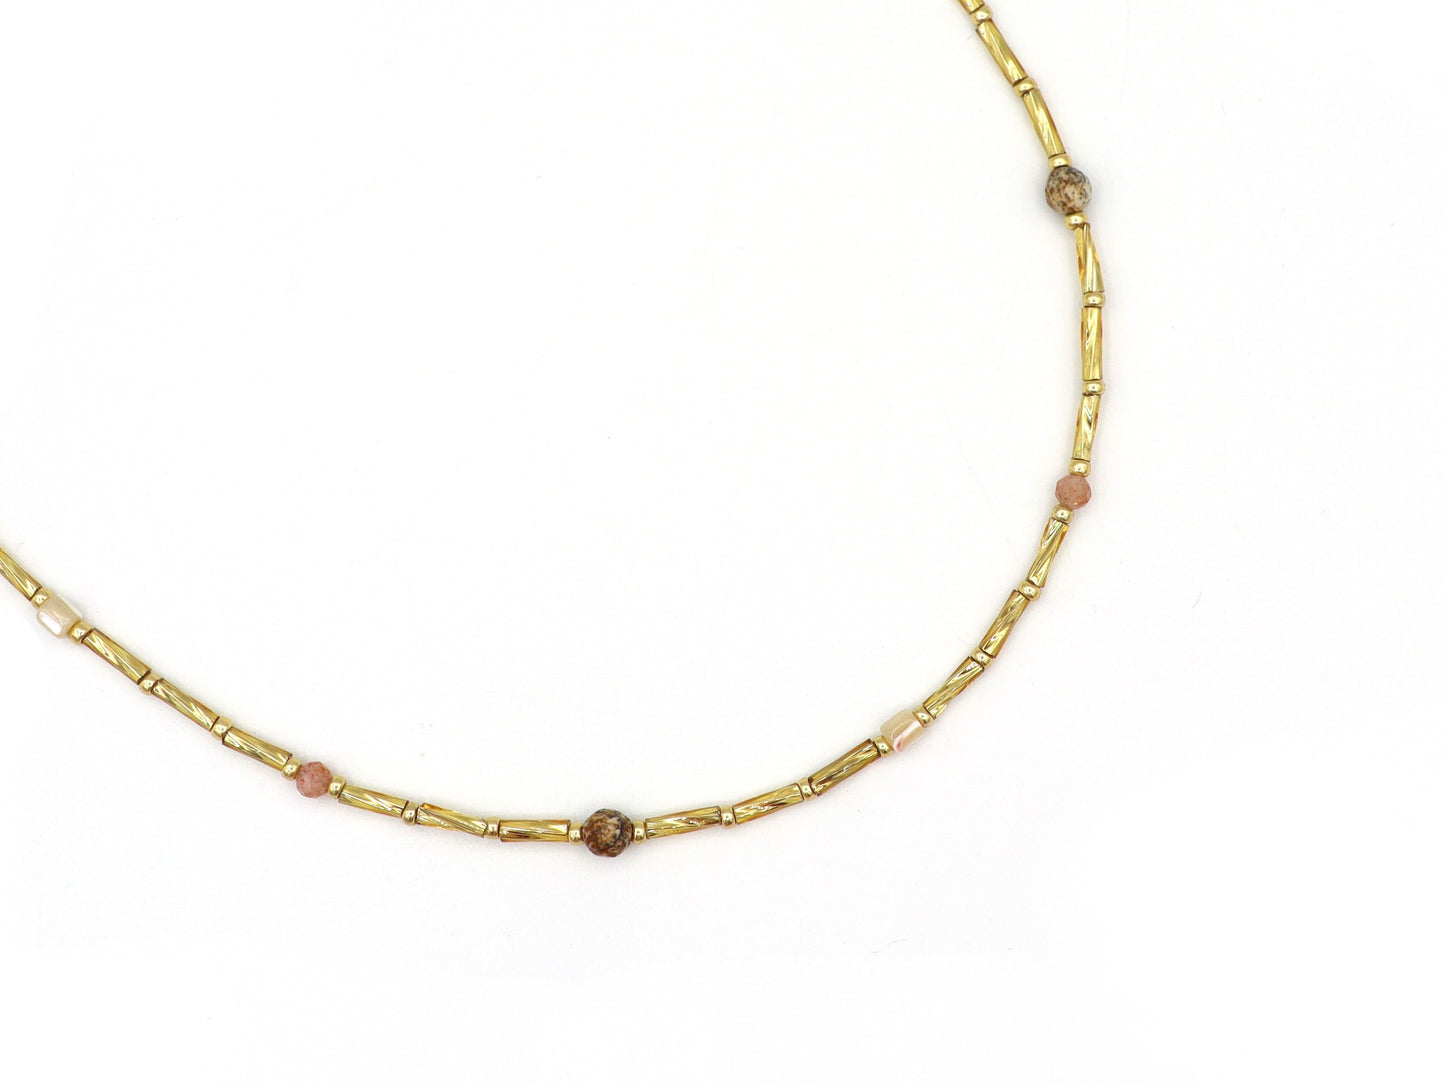 Necklace Fira jasper and sunstone, silver or gold stainless steel